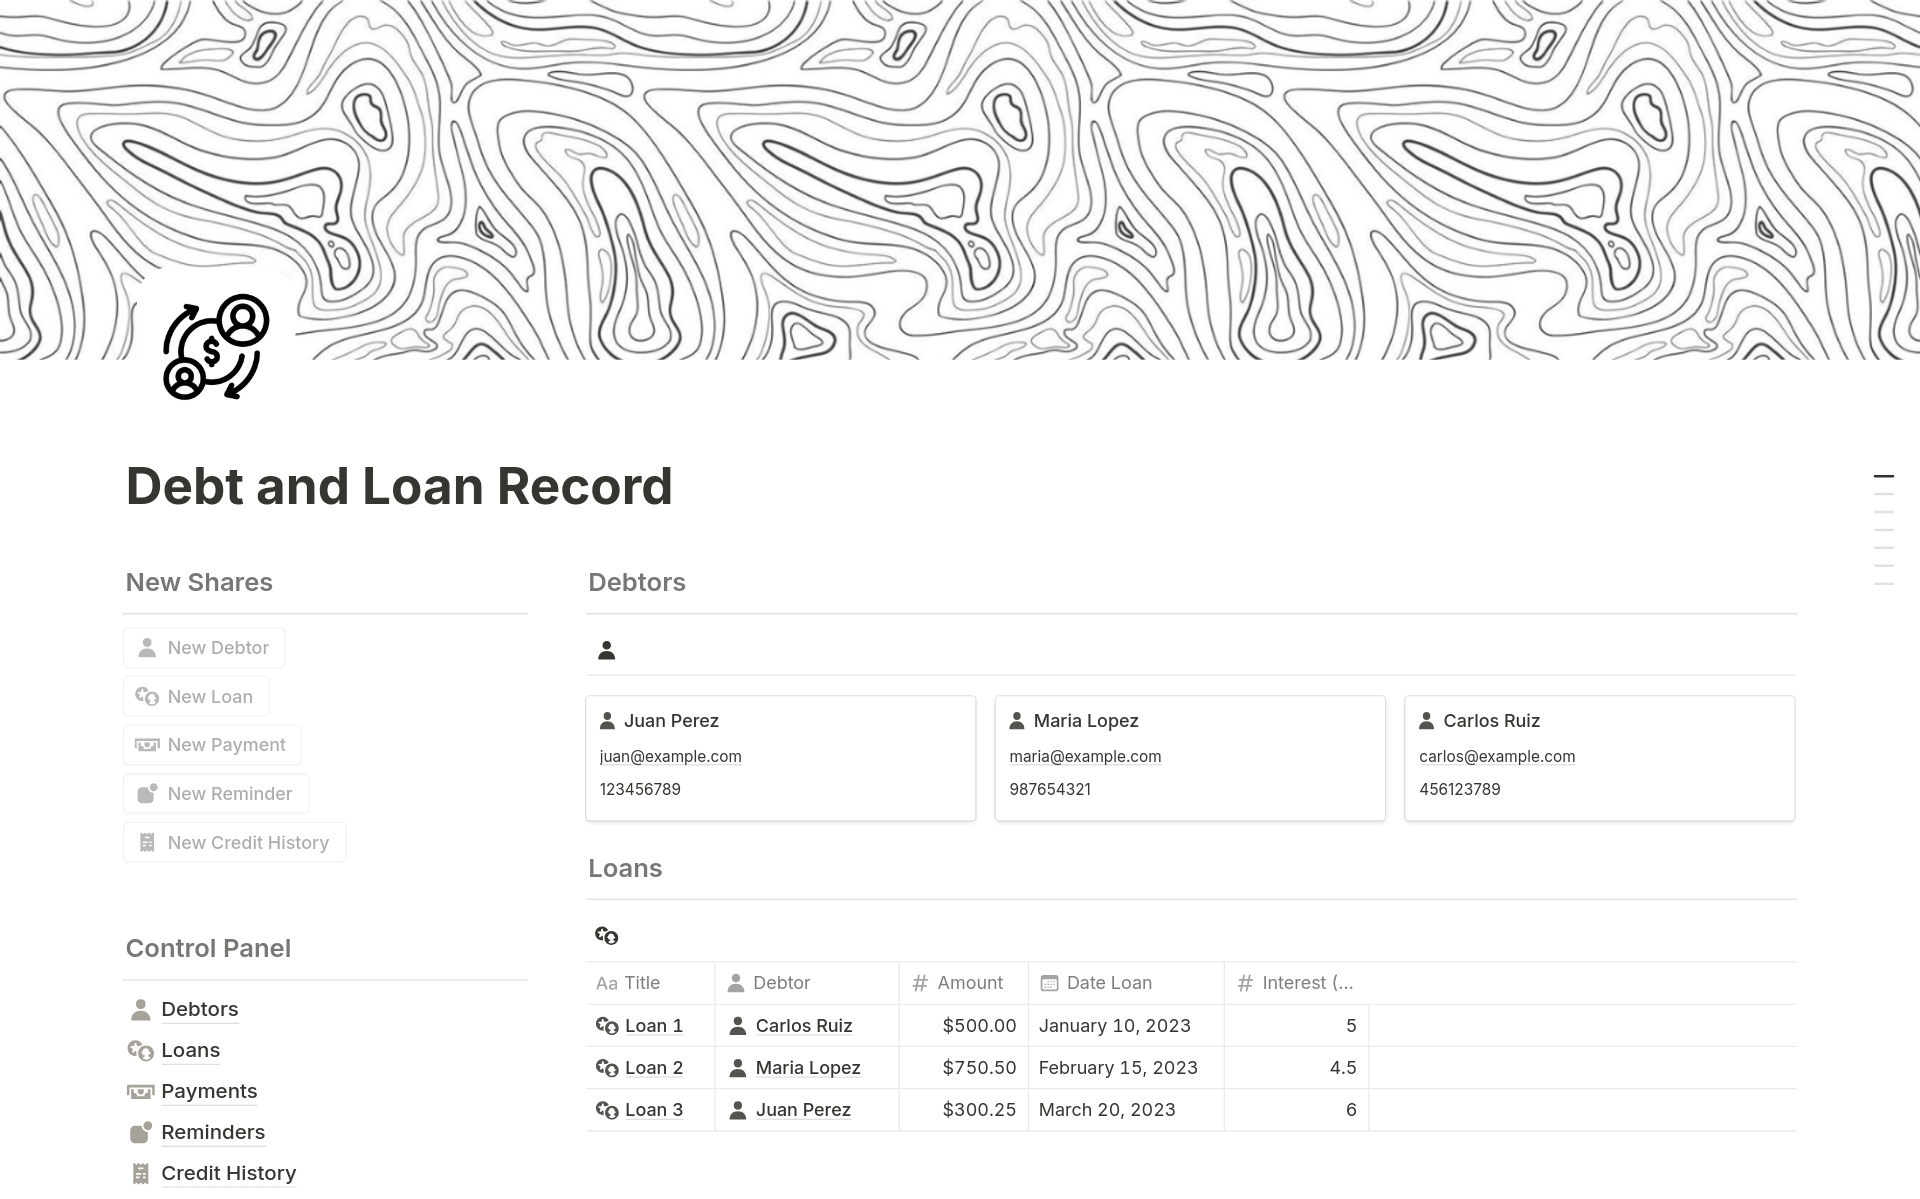 Monitor and manage your debts with our Debt and Loan Record template in Notion. Keep your finances under control.